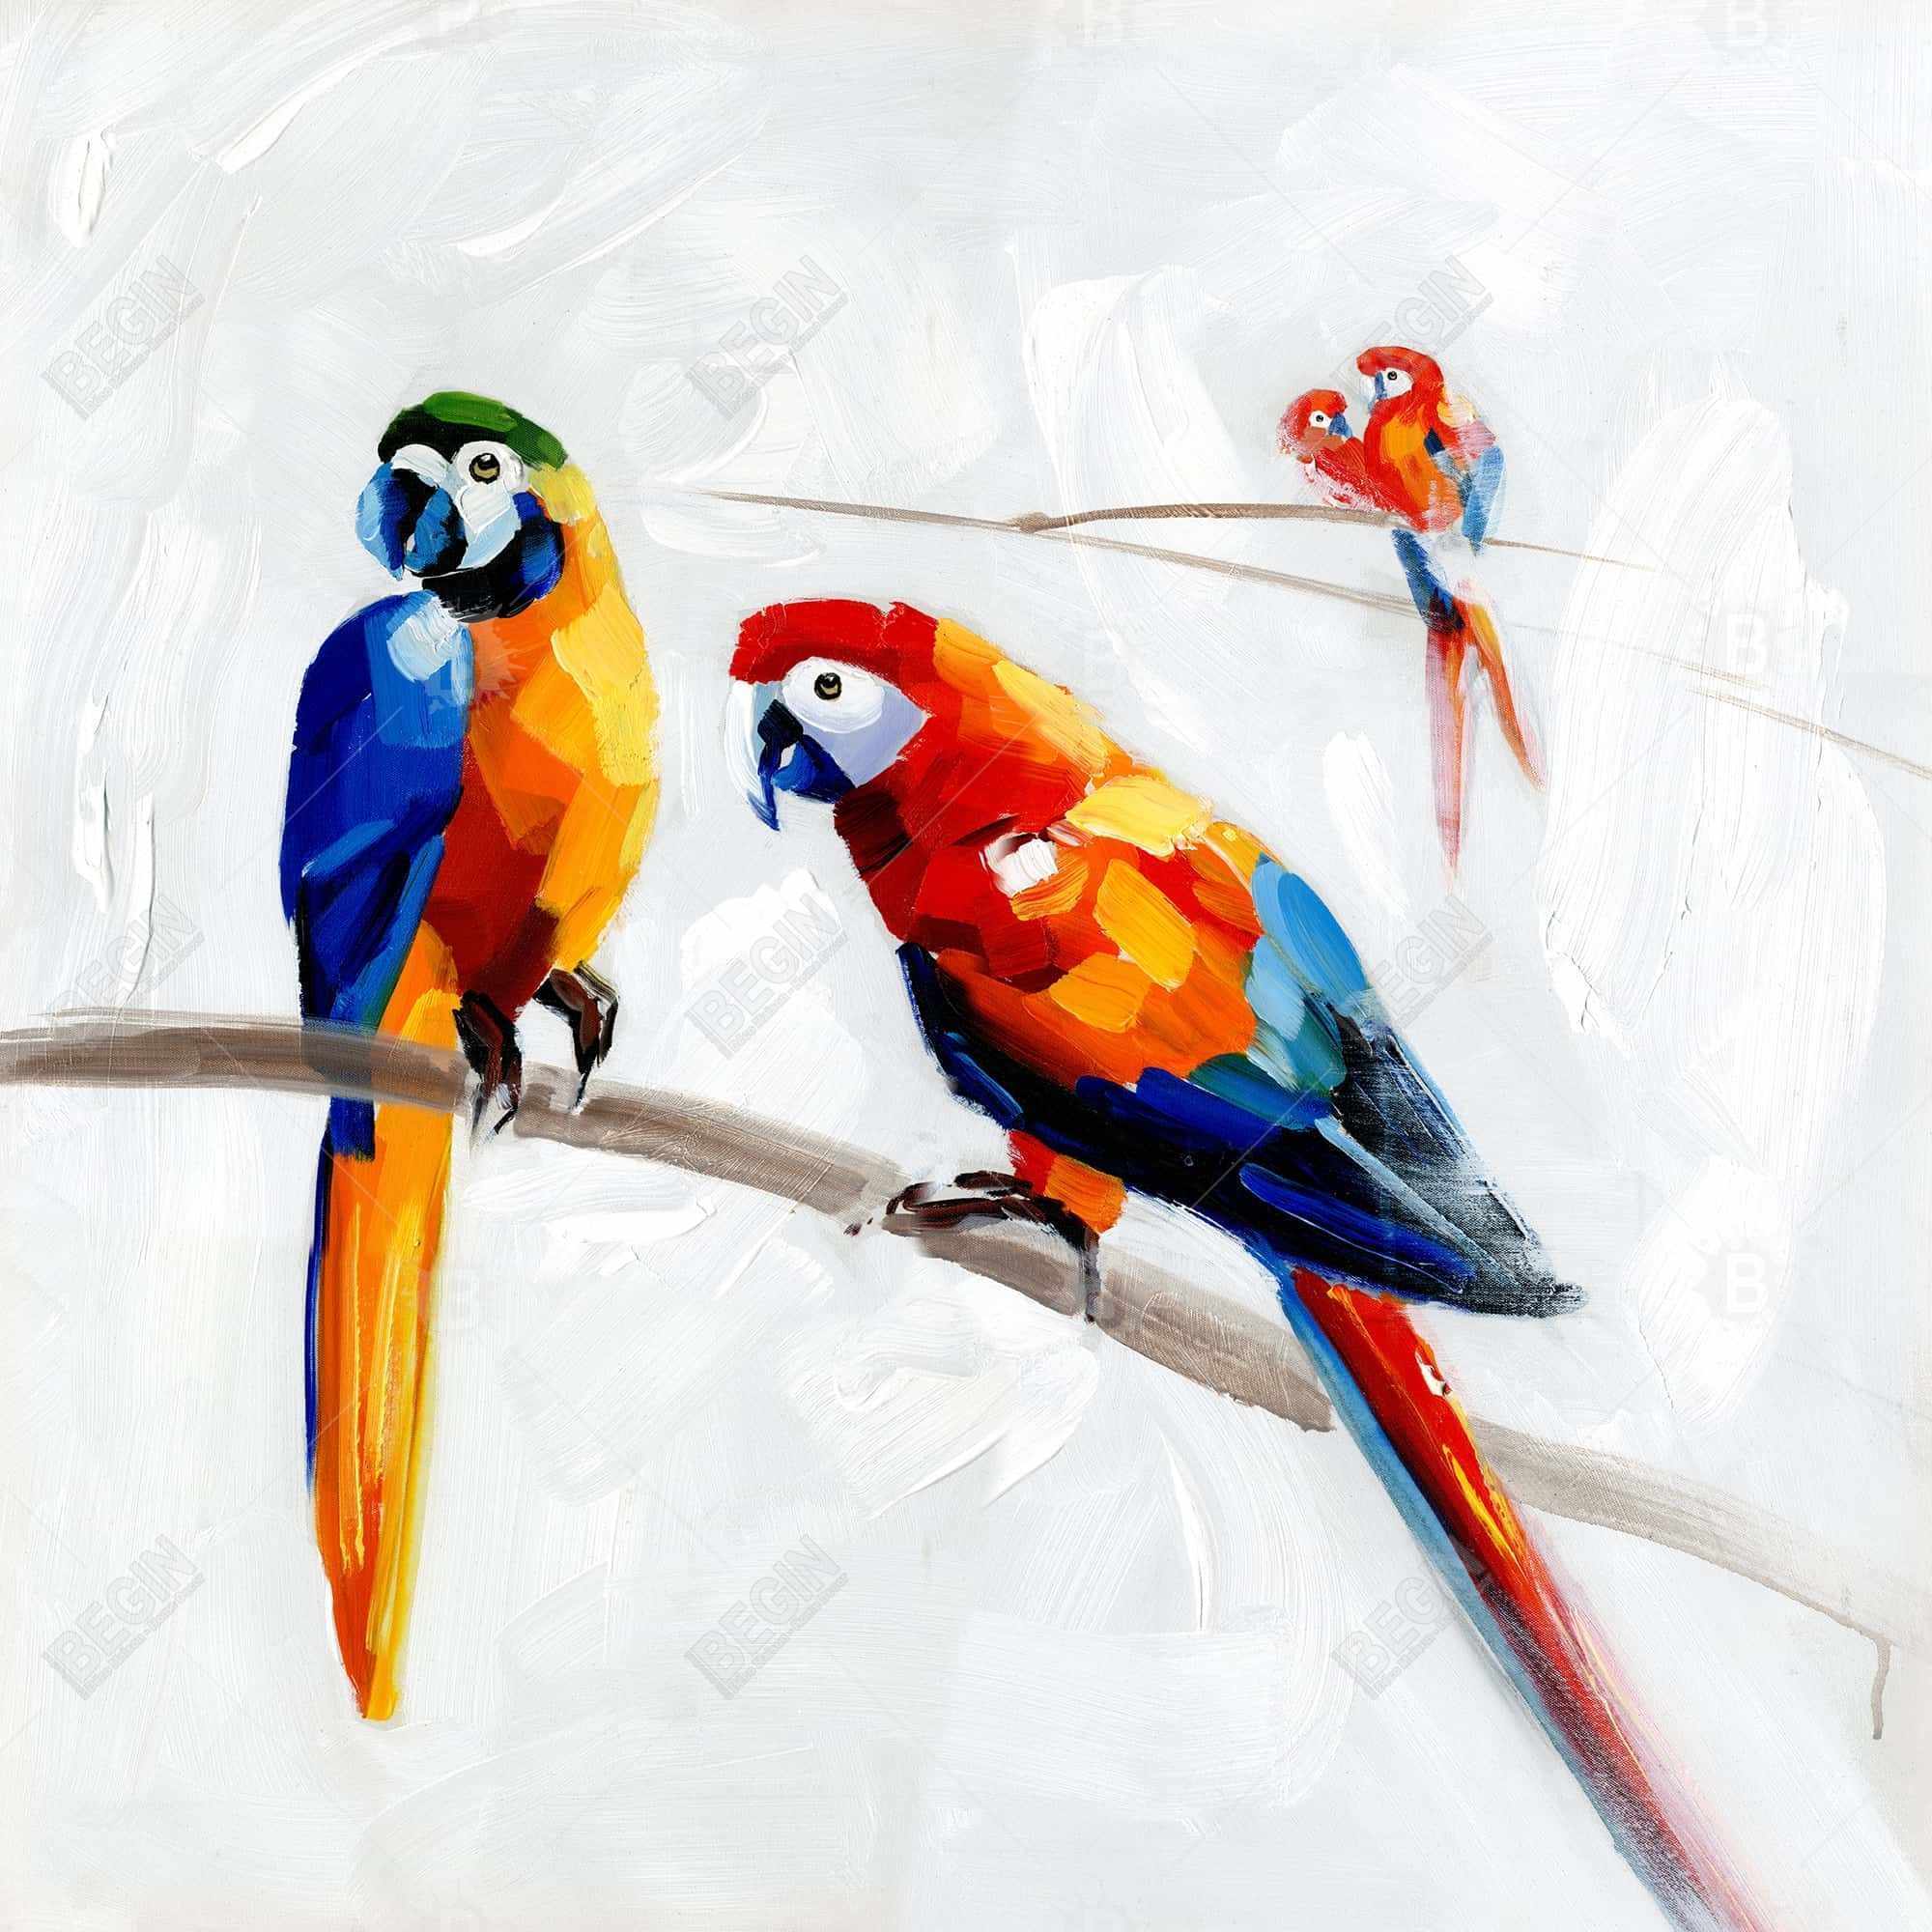 Parrots on a branch